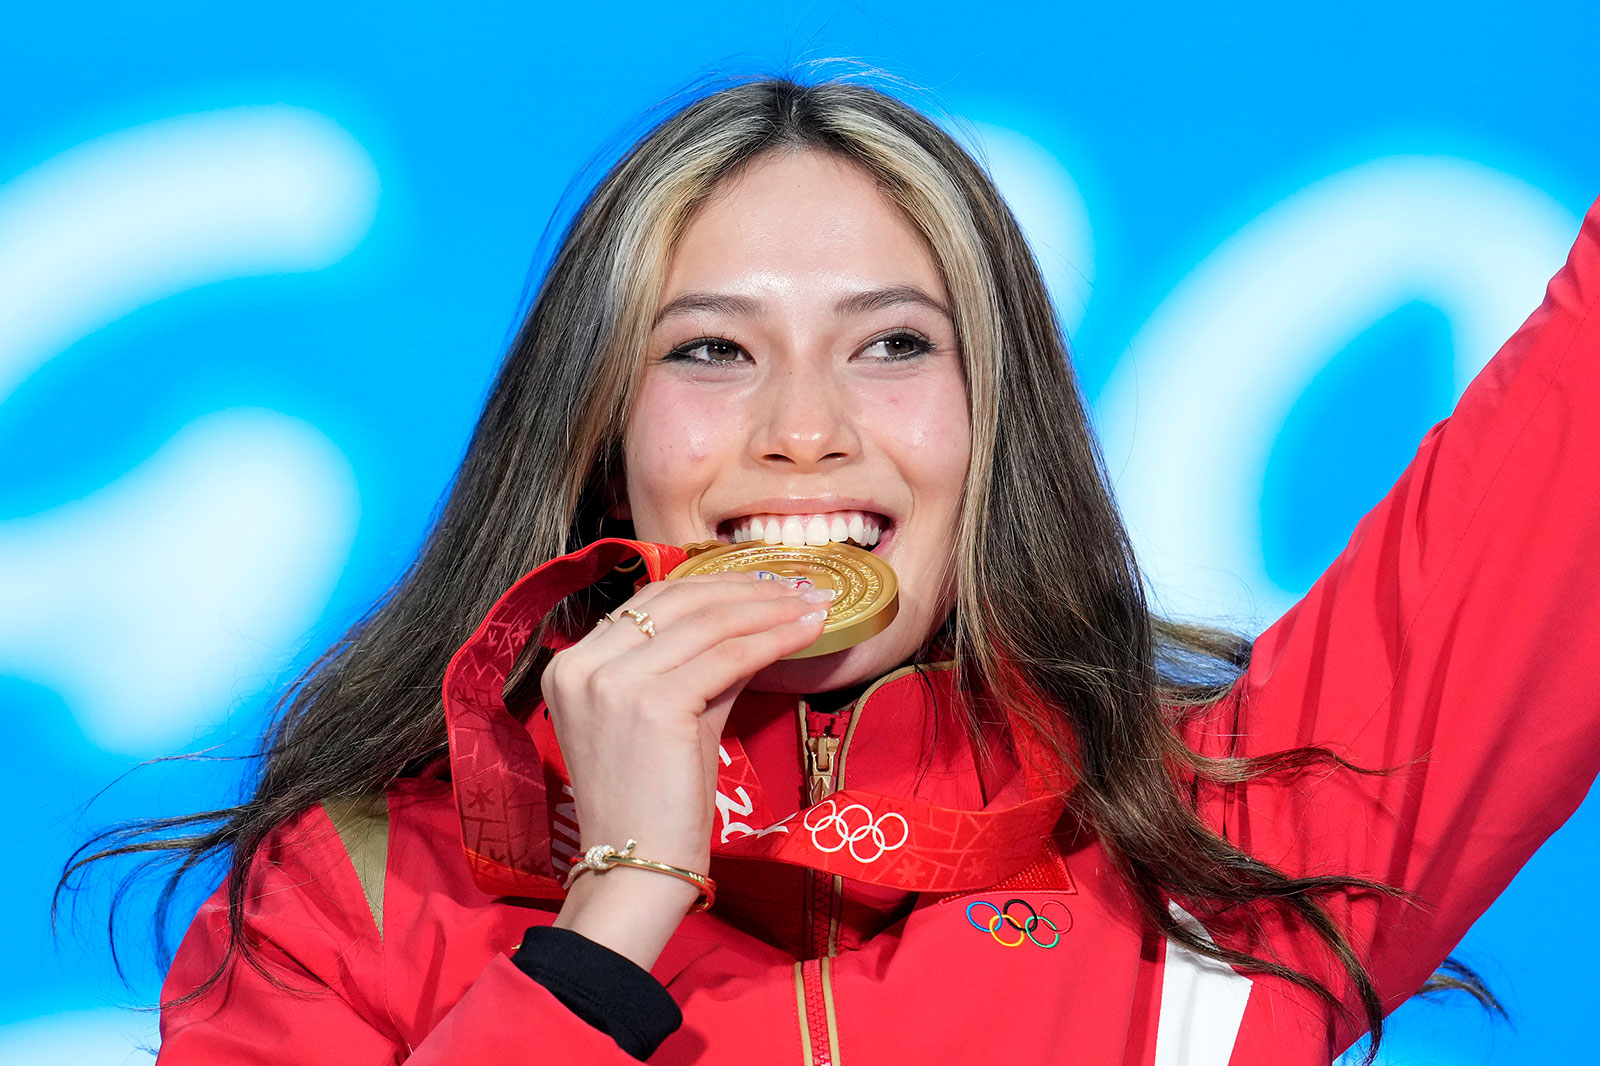 Chinese freestyle skier Eileen Gu bites her gold medal during the women's freeski big air medal ceremony on Tuesday.